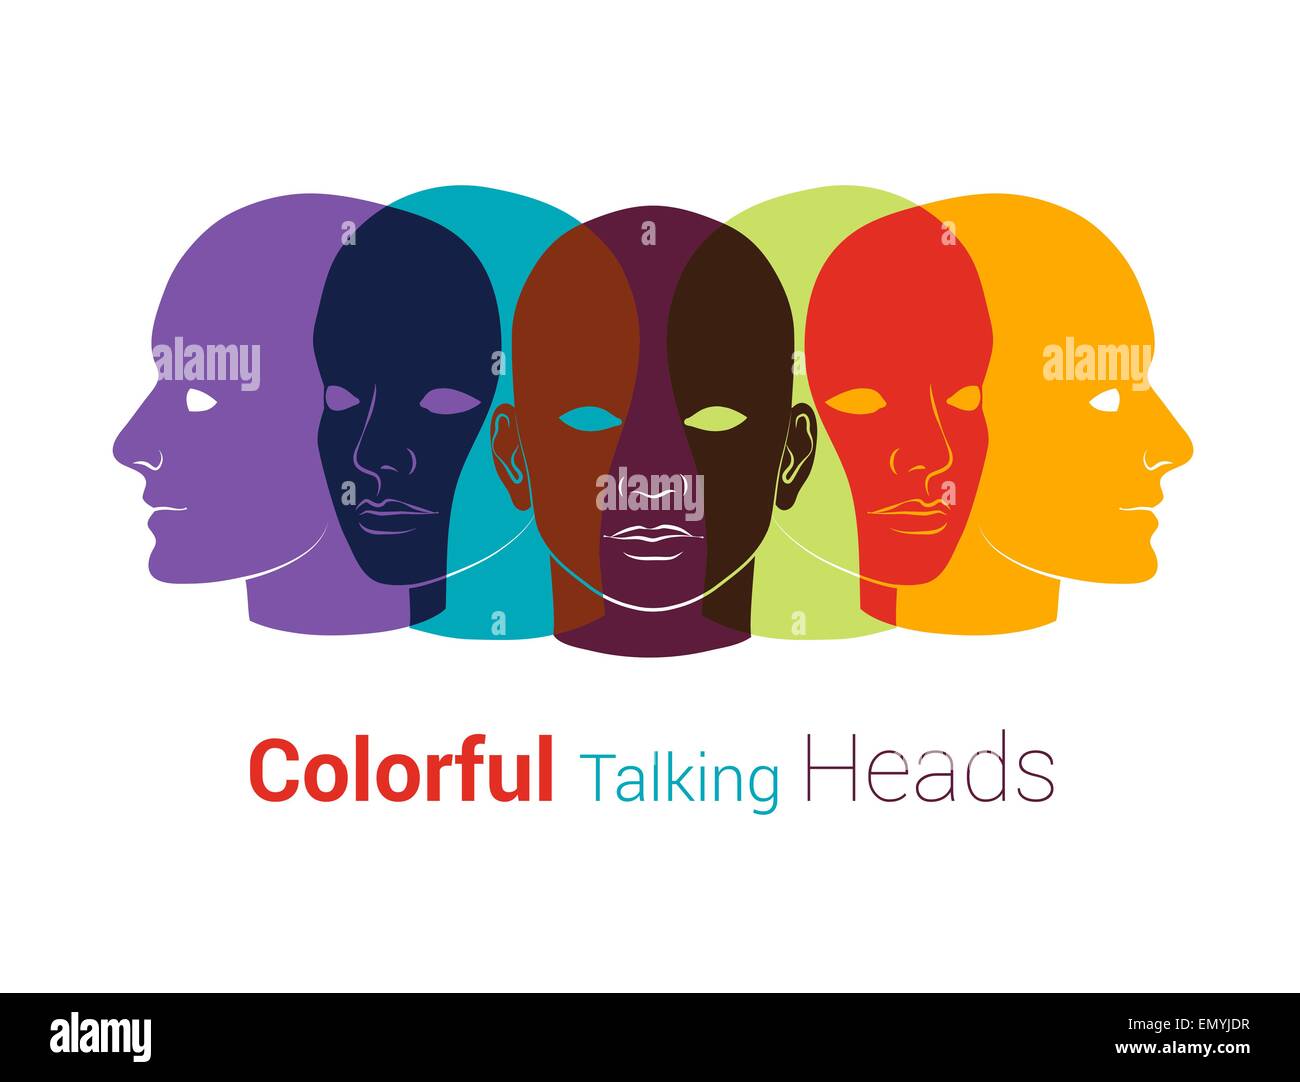 Human heads silhouettes. Group of people talking, working together. Concept illustration Stock Vector